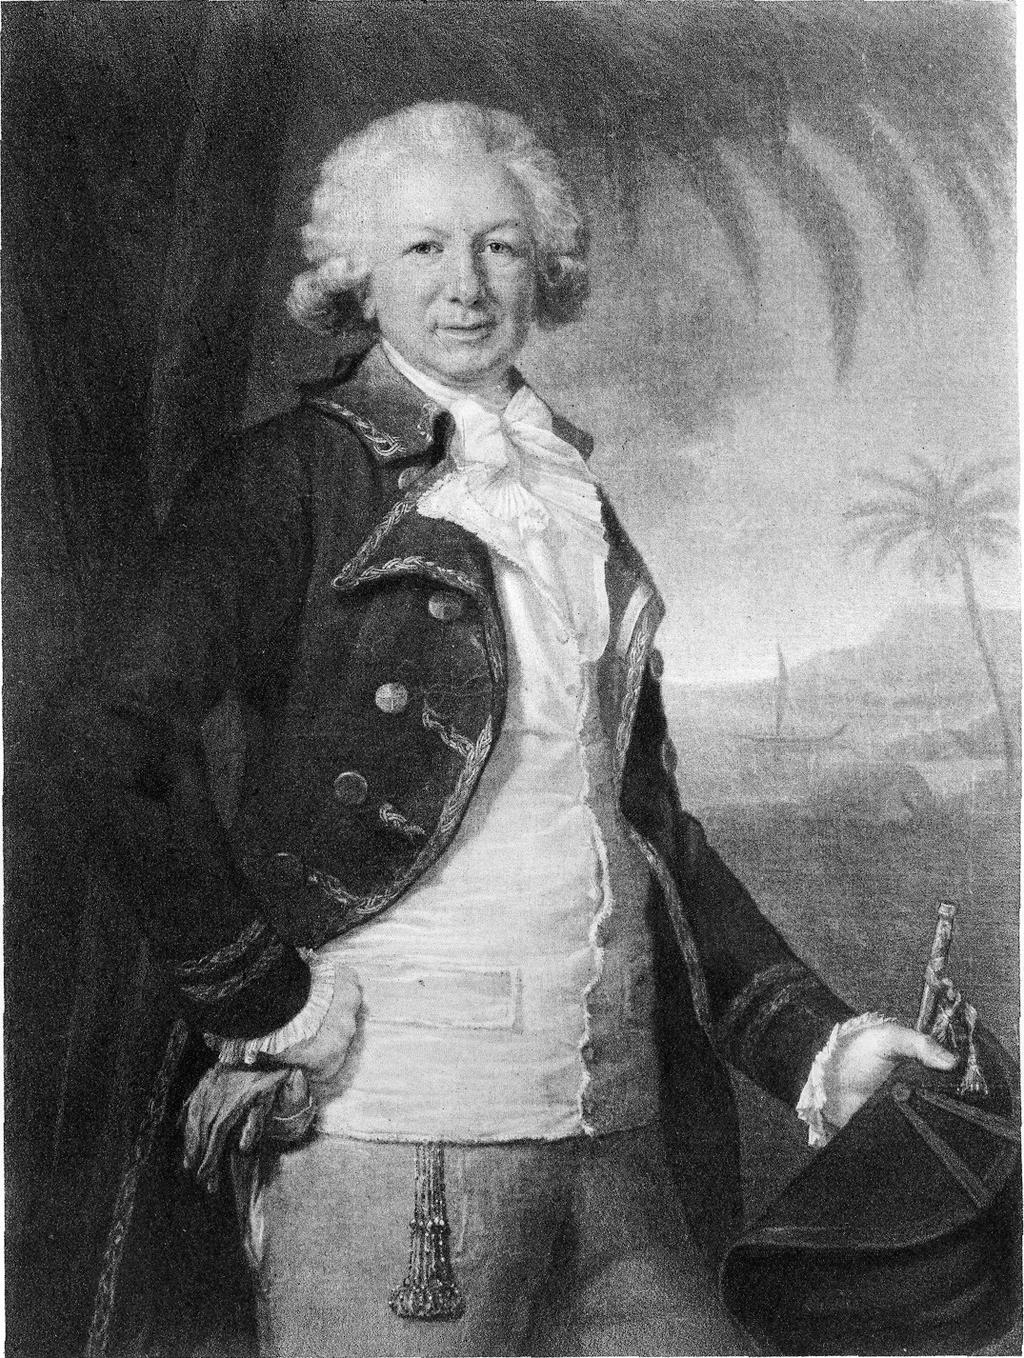 FRENCH Colonel Louis-Antoine de Bougainville (BOO-gan-vil) After the war, he became an officer in the navy. In 1781, the French were helping the Americans fight the American Revolution.